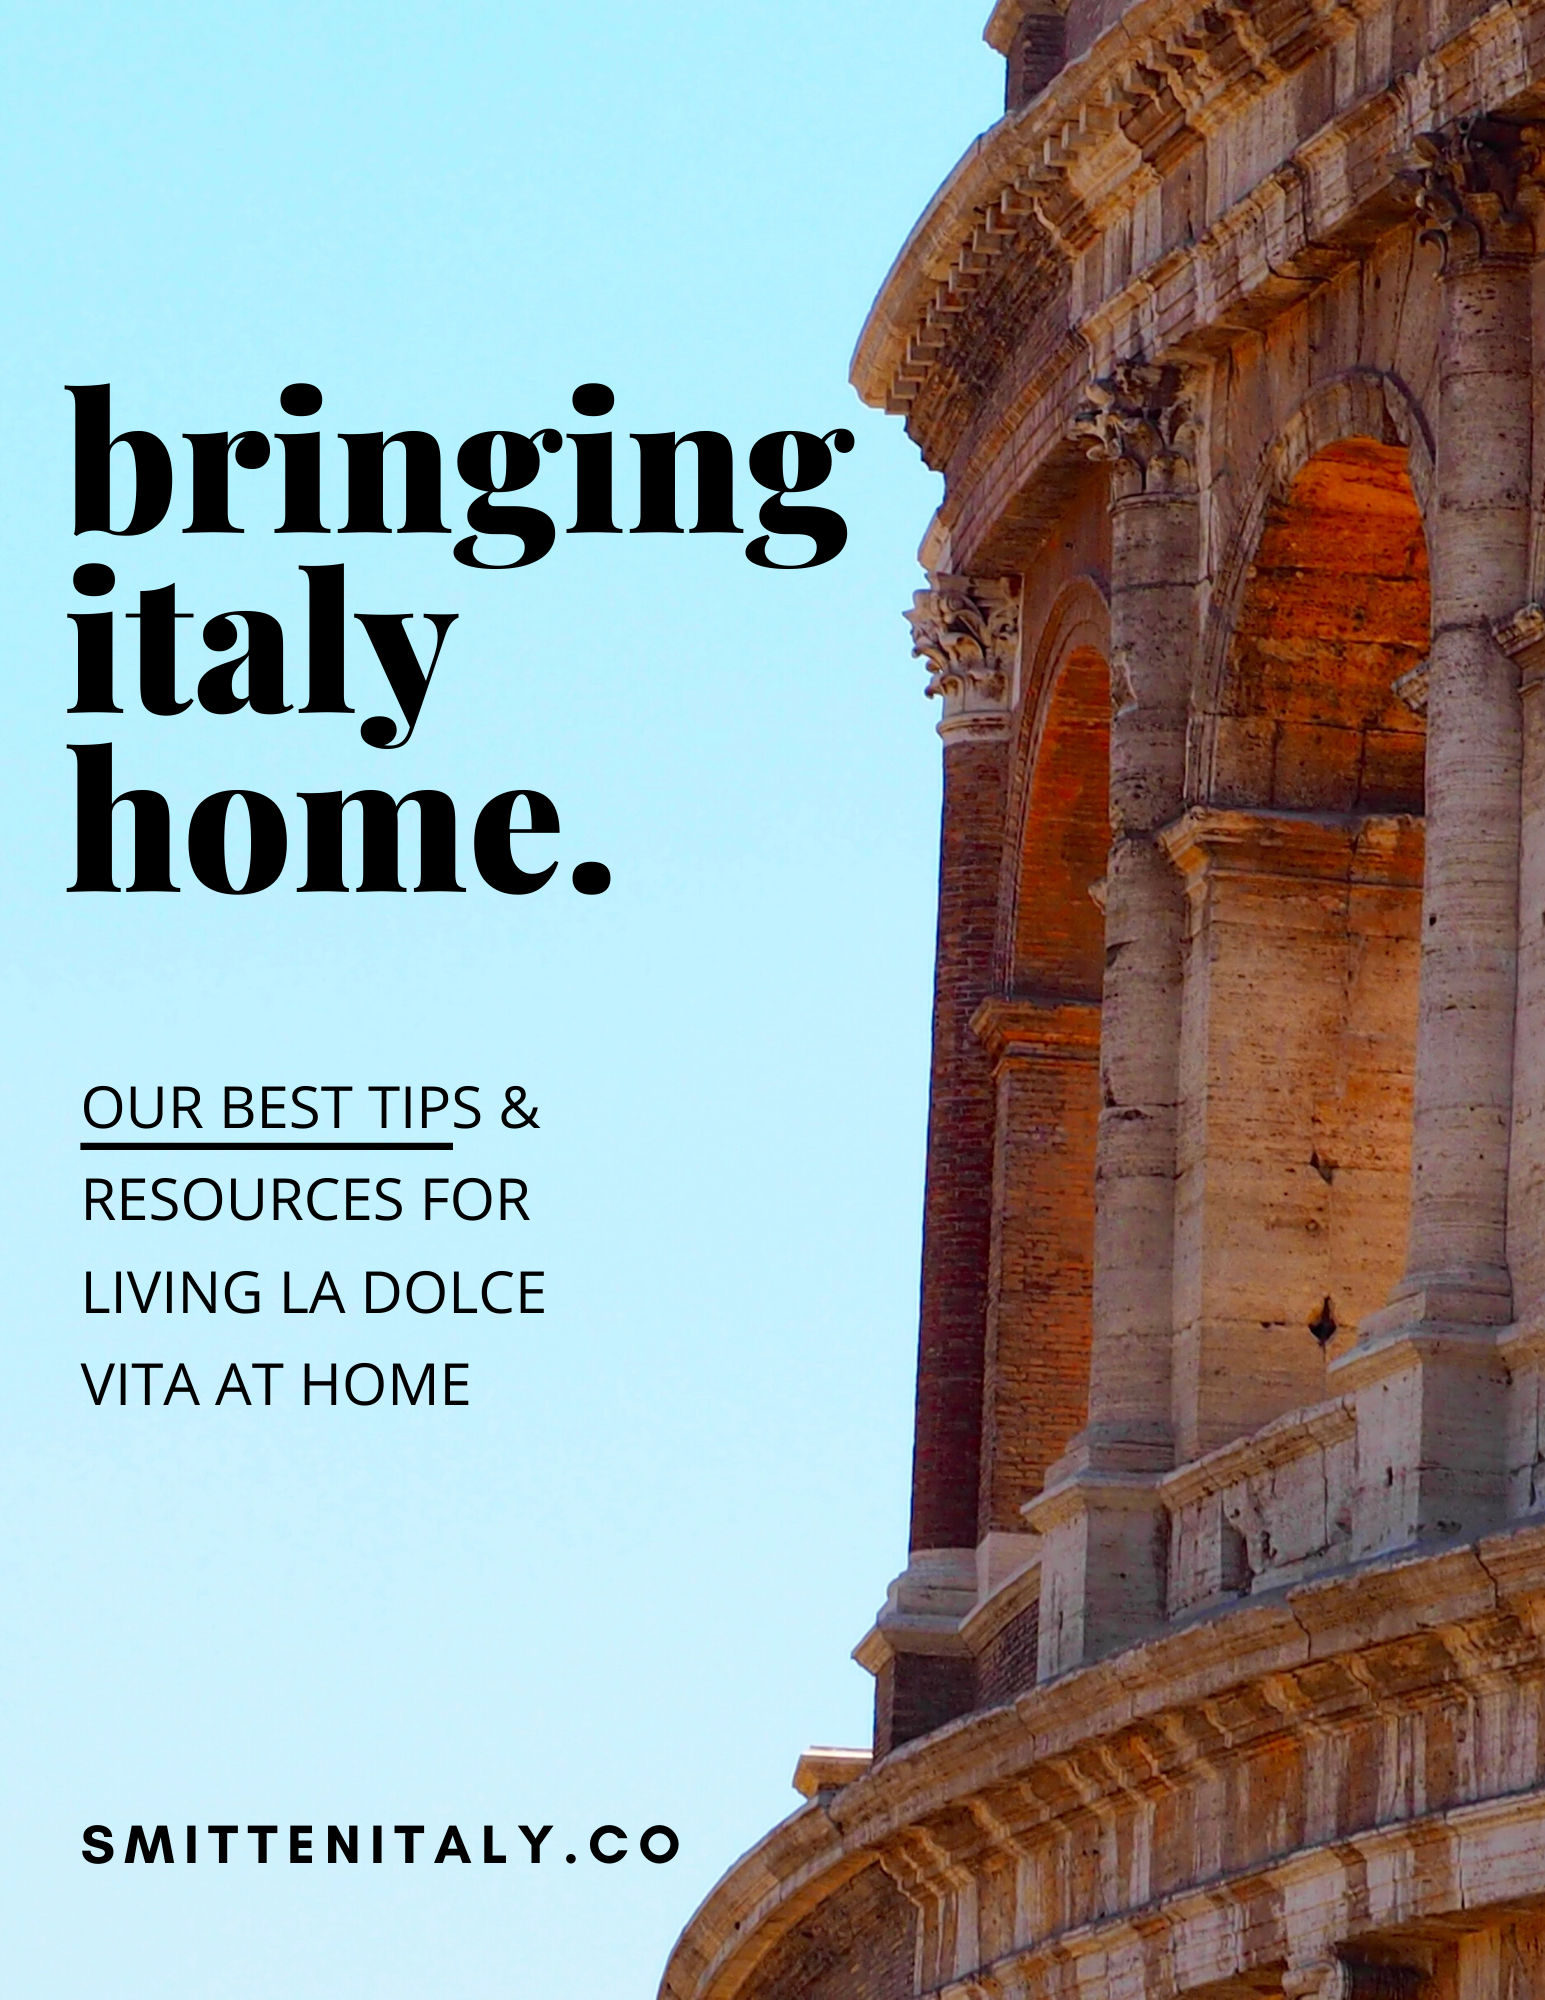 Bringing Italy Home. (simple ideas to live "la dolce vita" at home) 2